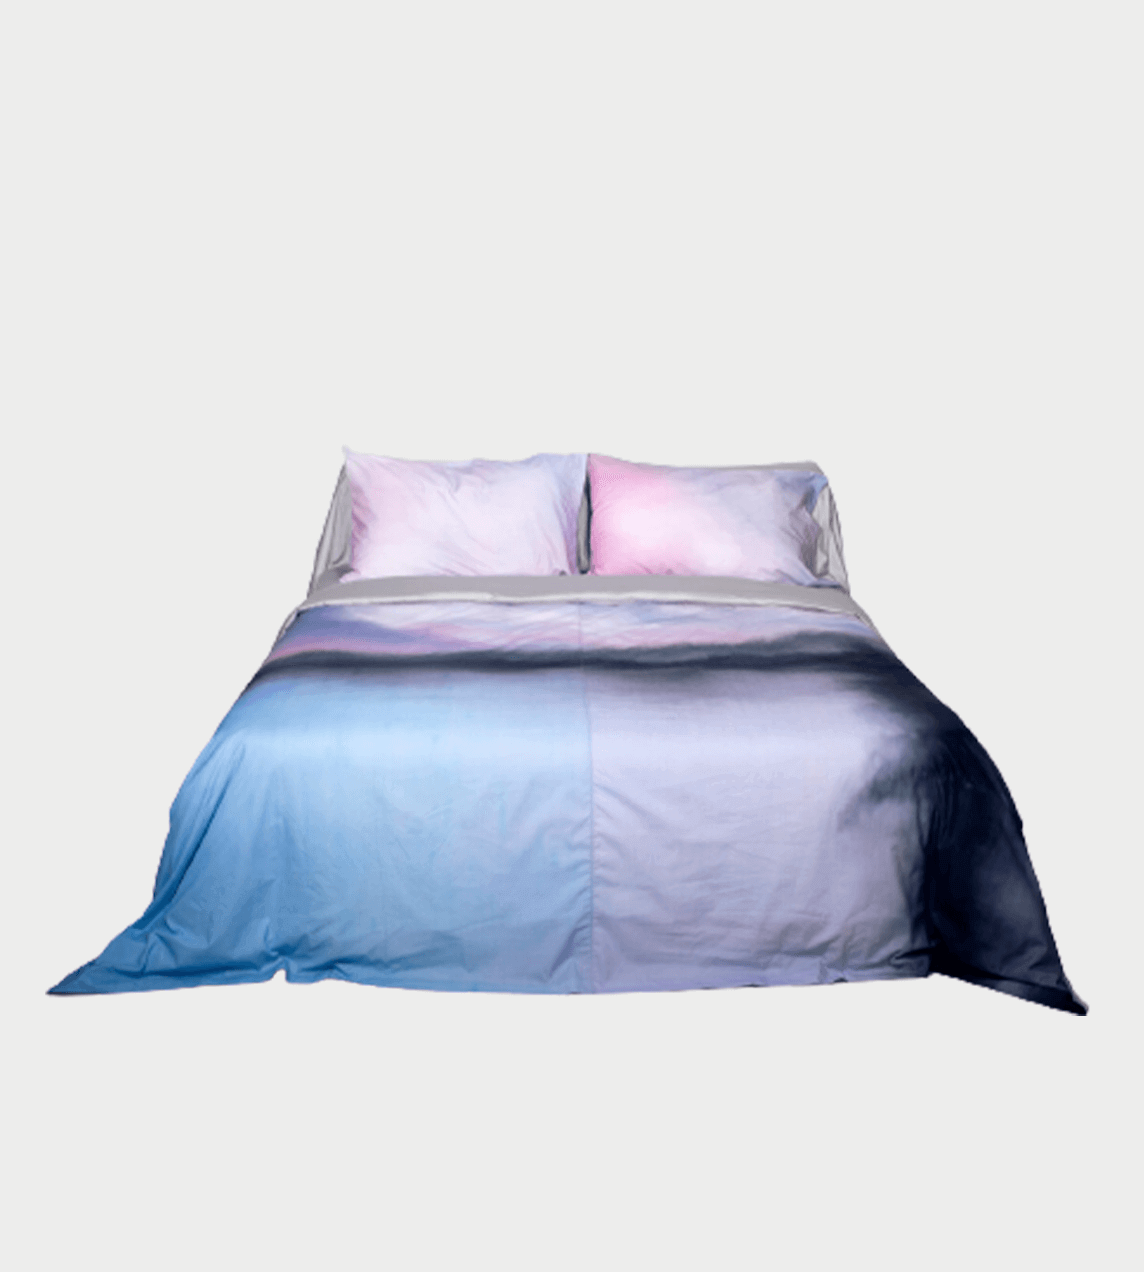 Serapis - 'Alps' Printed Bed Sheets Queen Size